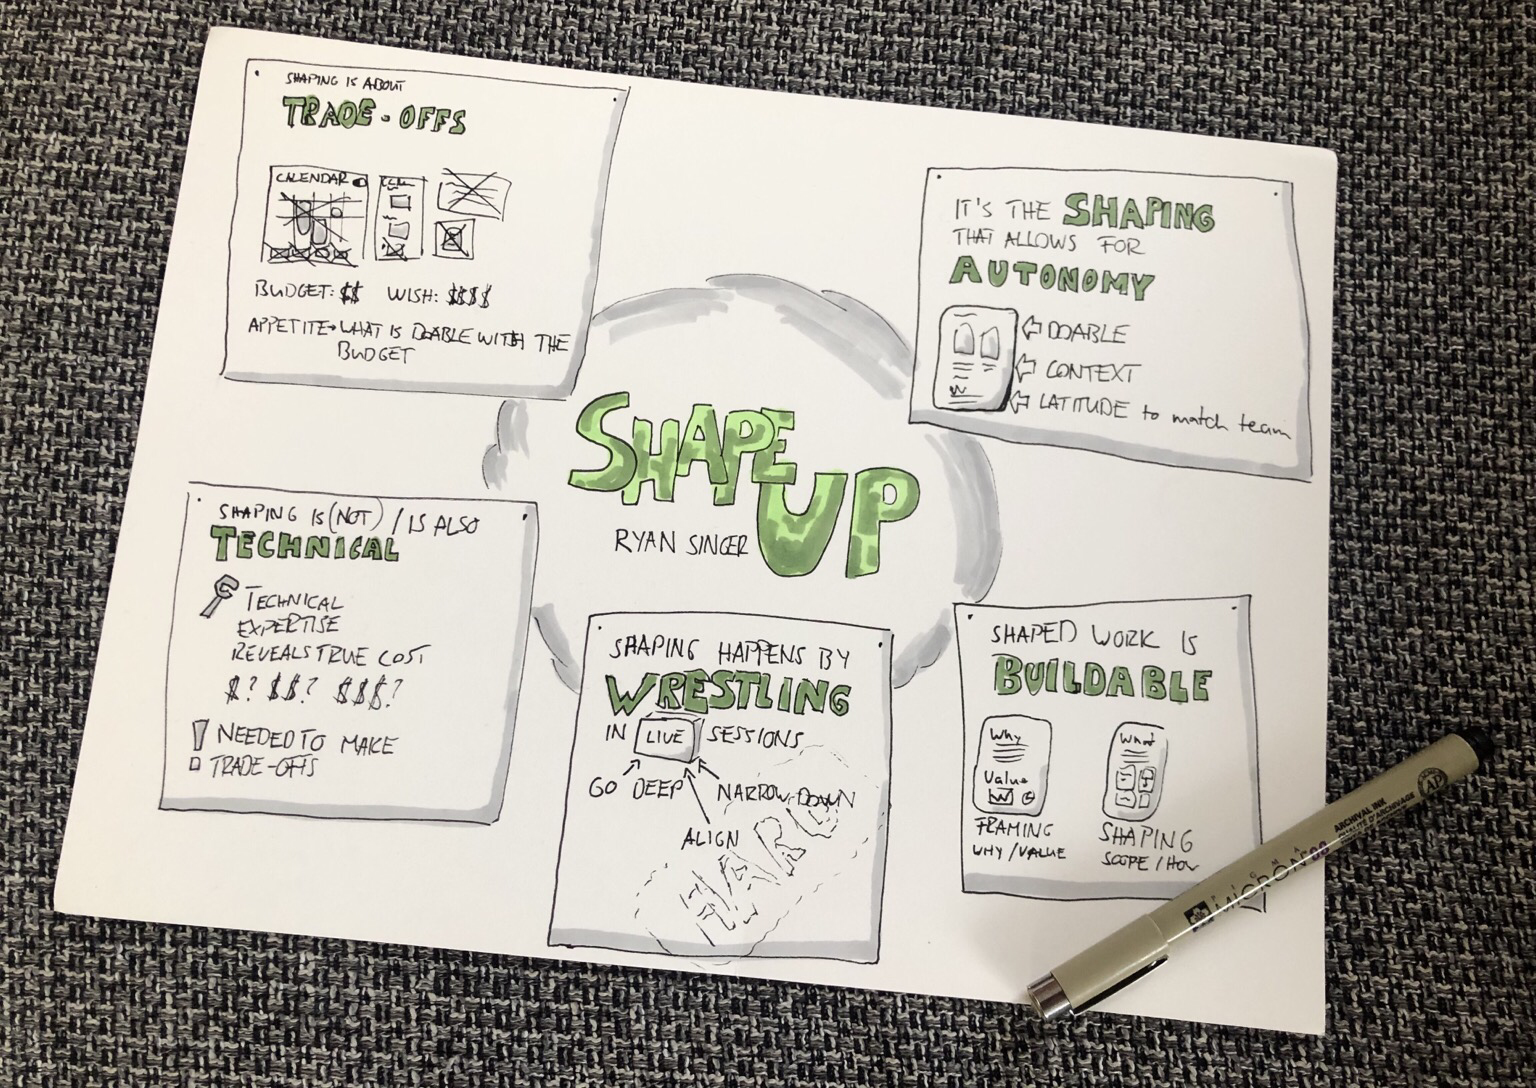 Notes about shape up